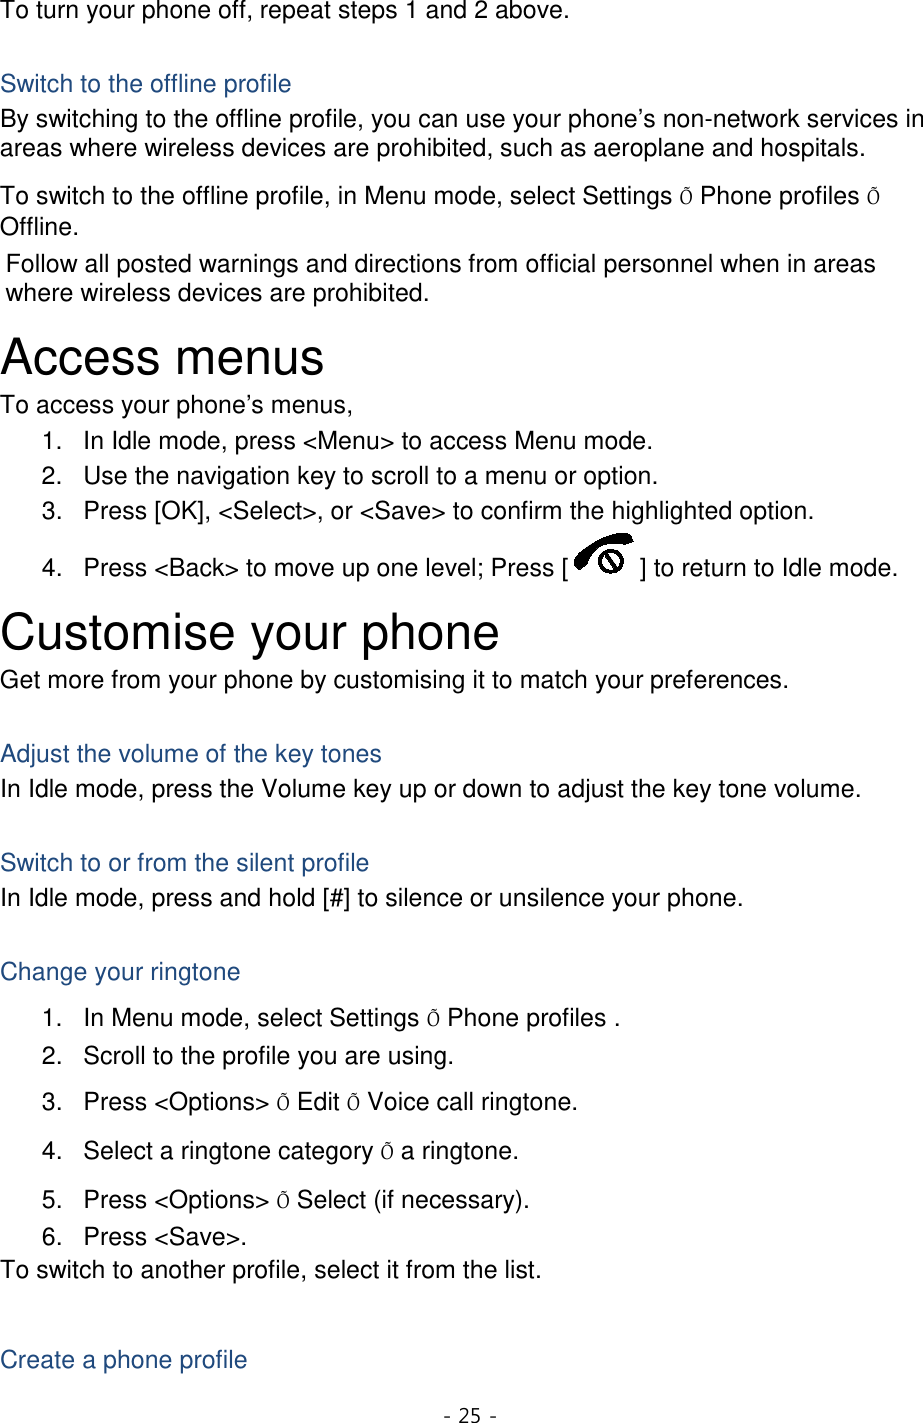 - 25 -  To turn your phone off, repeat steps 1 and 2 above.  Switch to the offline profile By switching to the offline profile, you can use your phone’s non-network services in areas where wireless devices are prohibited, such as aeroplane and hospitals. To switch to the offline profile, in Menu mode, select Settings Õ Phone profiles Õ Offline. Follow all posted warnings and directions from official personnel when in areas where wireless devices are prohibited. Access menus To access your phone’s menus, 1. In Idle mode, press &lt;Menu&gt; to access Menu mode. 2. Use the navigation key to scroll to a menu or option. 3. Press [OK], &lt;Select&gt;, or &lt;Save&gt; to confirm the highlighted option. 4. Press &lt;Back&gt; to move up one level; Press [ ] to return to Idle mode. Customise your phone Get more from your phone by customising it to match your preferences.  Adjust the volume of the key tones In Idle mode, press the Volume key up or down to adjust the key tone volume.  Switch to or from the silent profile In Idle mode, press and hold [#] to silence or unsilence your phone.  Change your ringtone 1. In Menu mode, select Settings Õ Phone profiles . 2. Scroll to the profile you are using. 3. Press &lt;Options&gt; Õ Edit Õ Voice call ringtone. 4. Select a ringtone category Õ a ringtone. 5. Press &lt;Options&gt; Õ Select (if necessary). 6. Press &lt;Save&gt;. To switch to another profile, select it from the list.  Create a phone profile 